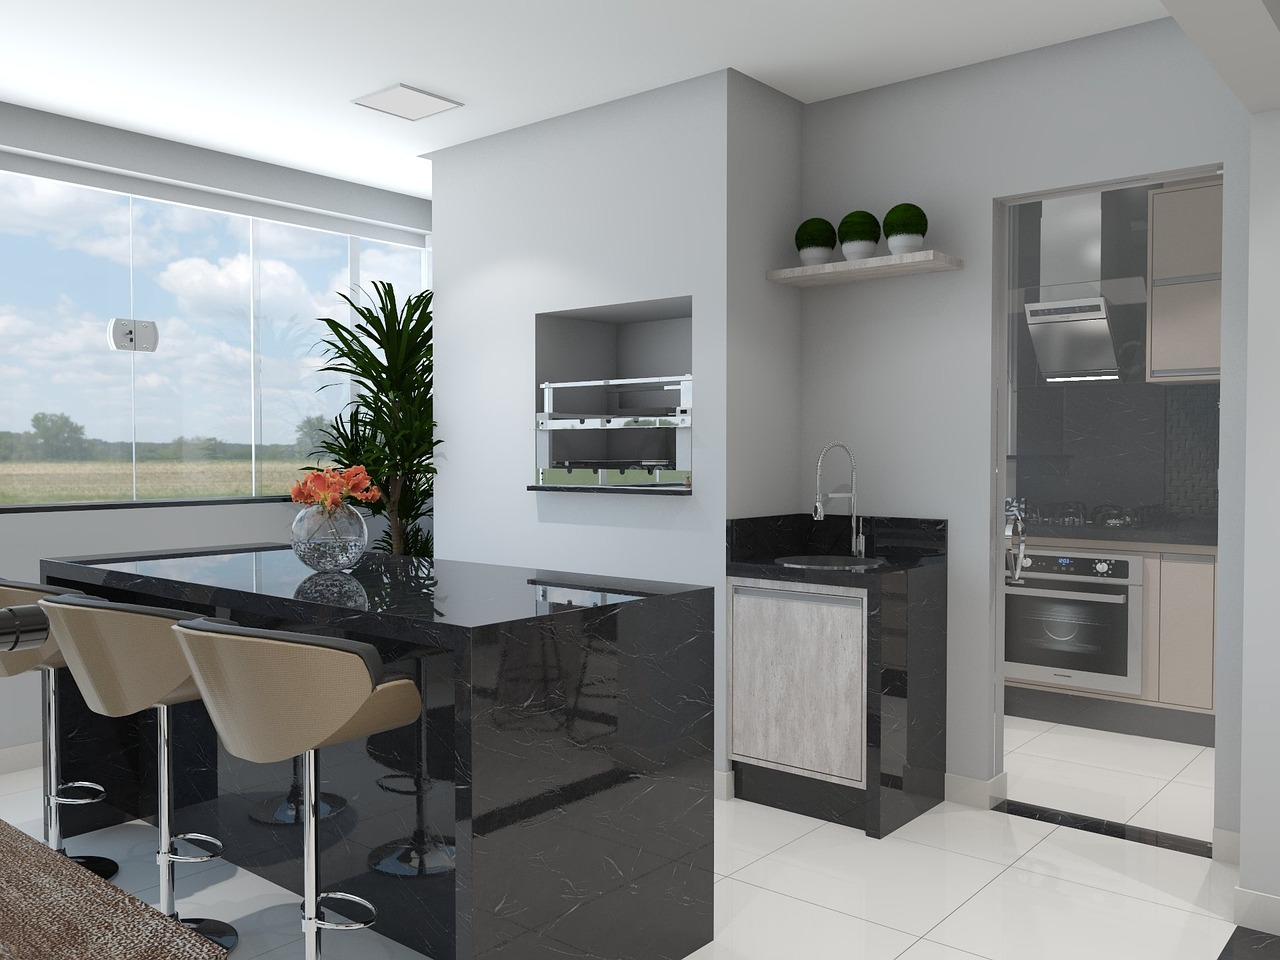 An image showcasing Proper Services' professional kitchen design services in London. Our team creates innovative and functional kitchen designs to transform your space.